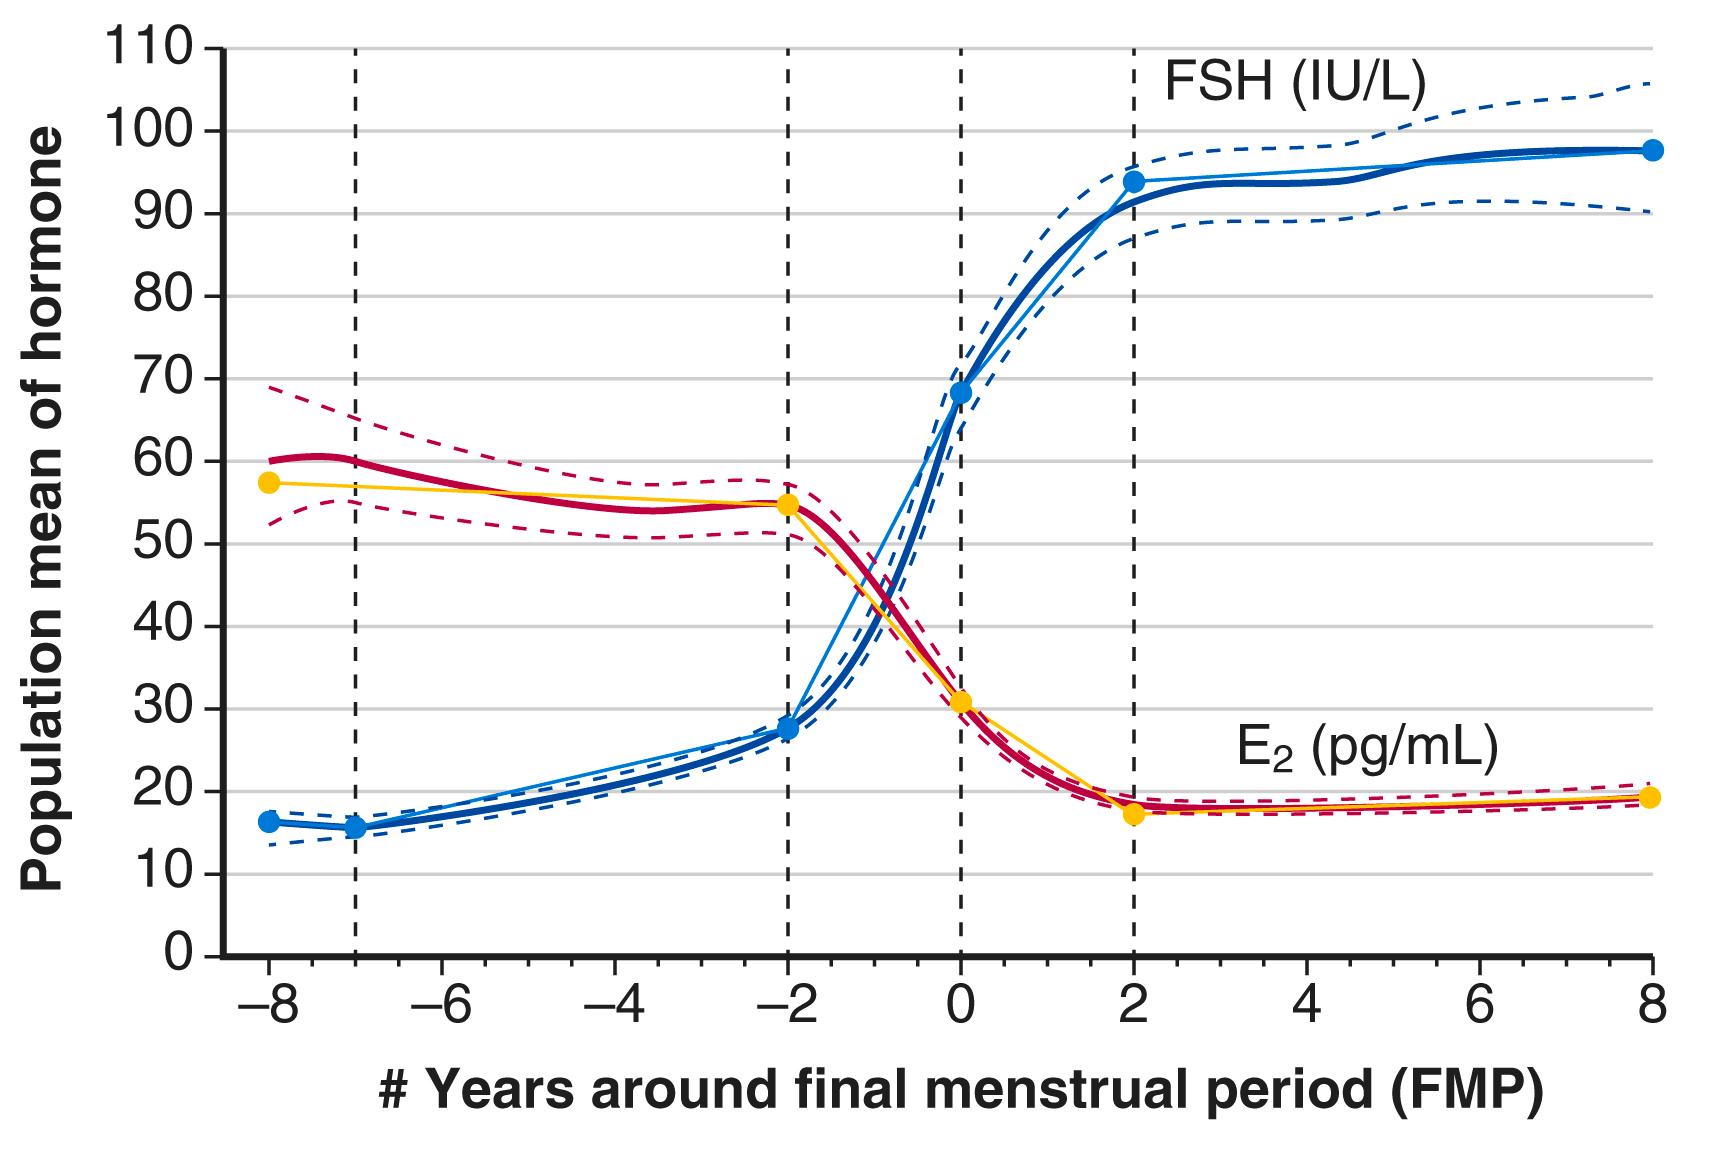 Fig. 14.5, Adjusted population means (95% confidence interval) for segmented mean profiles of follicle-stimulating hormone and estradiol across the final menstrual period in the Study of Women’s Health Across the Nation ( n = 1215).